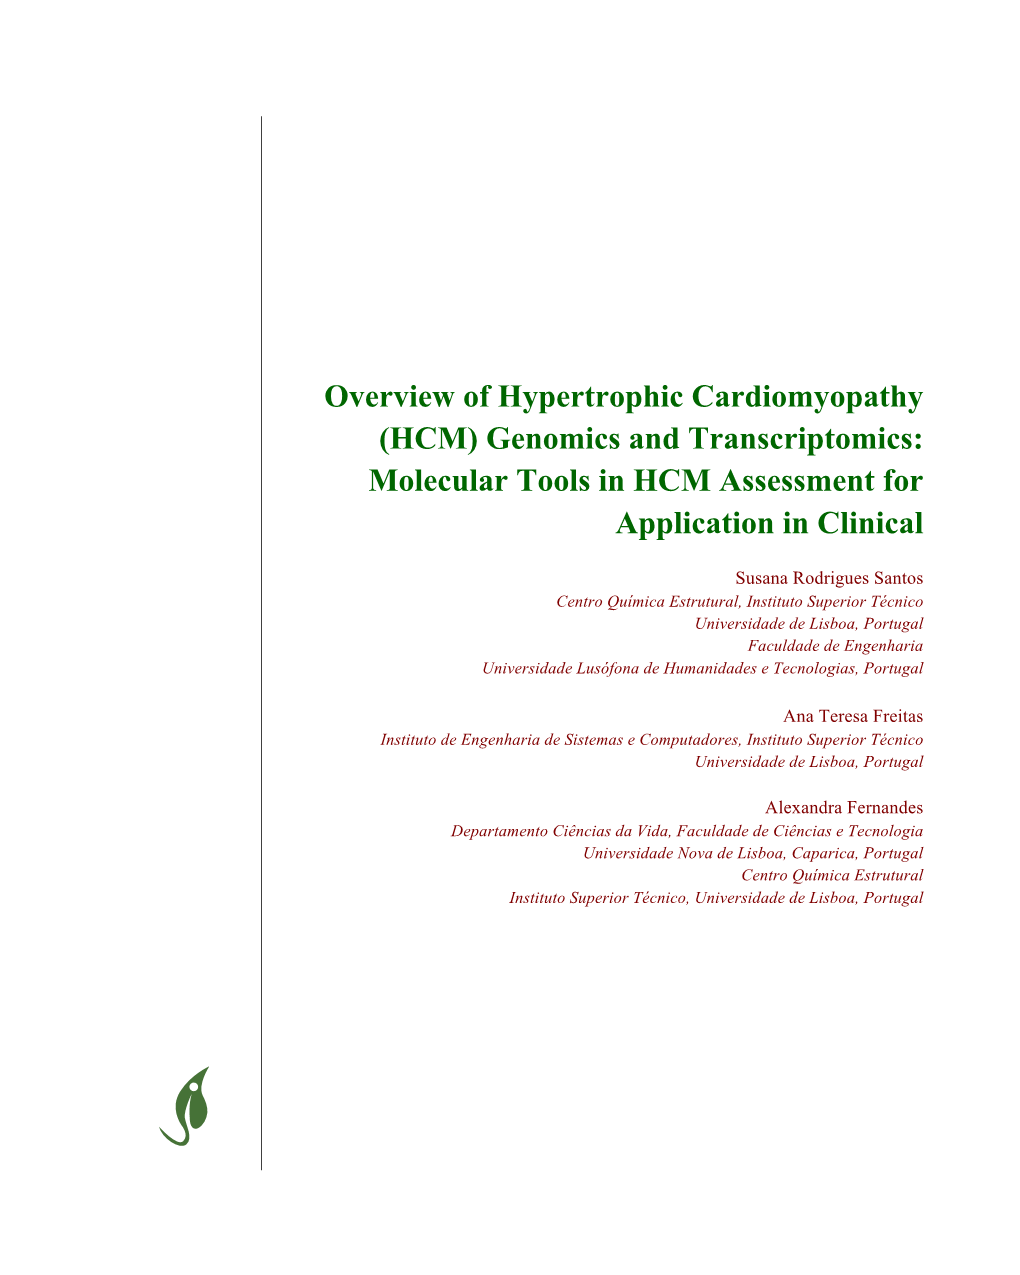 Overview of Hypertrophic Cardiomyopathy (HCM) Genomics and Transcriptomics: Molecular Tools in HCM Assessment for Application in Clinical